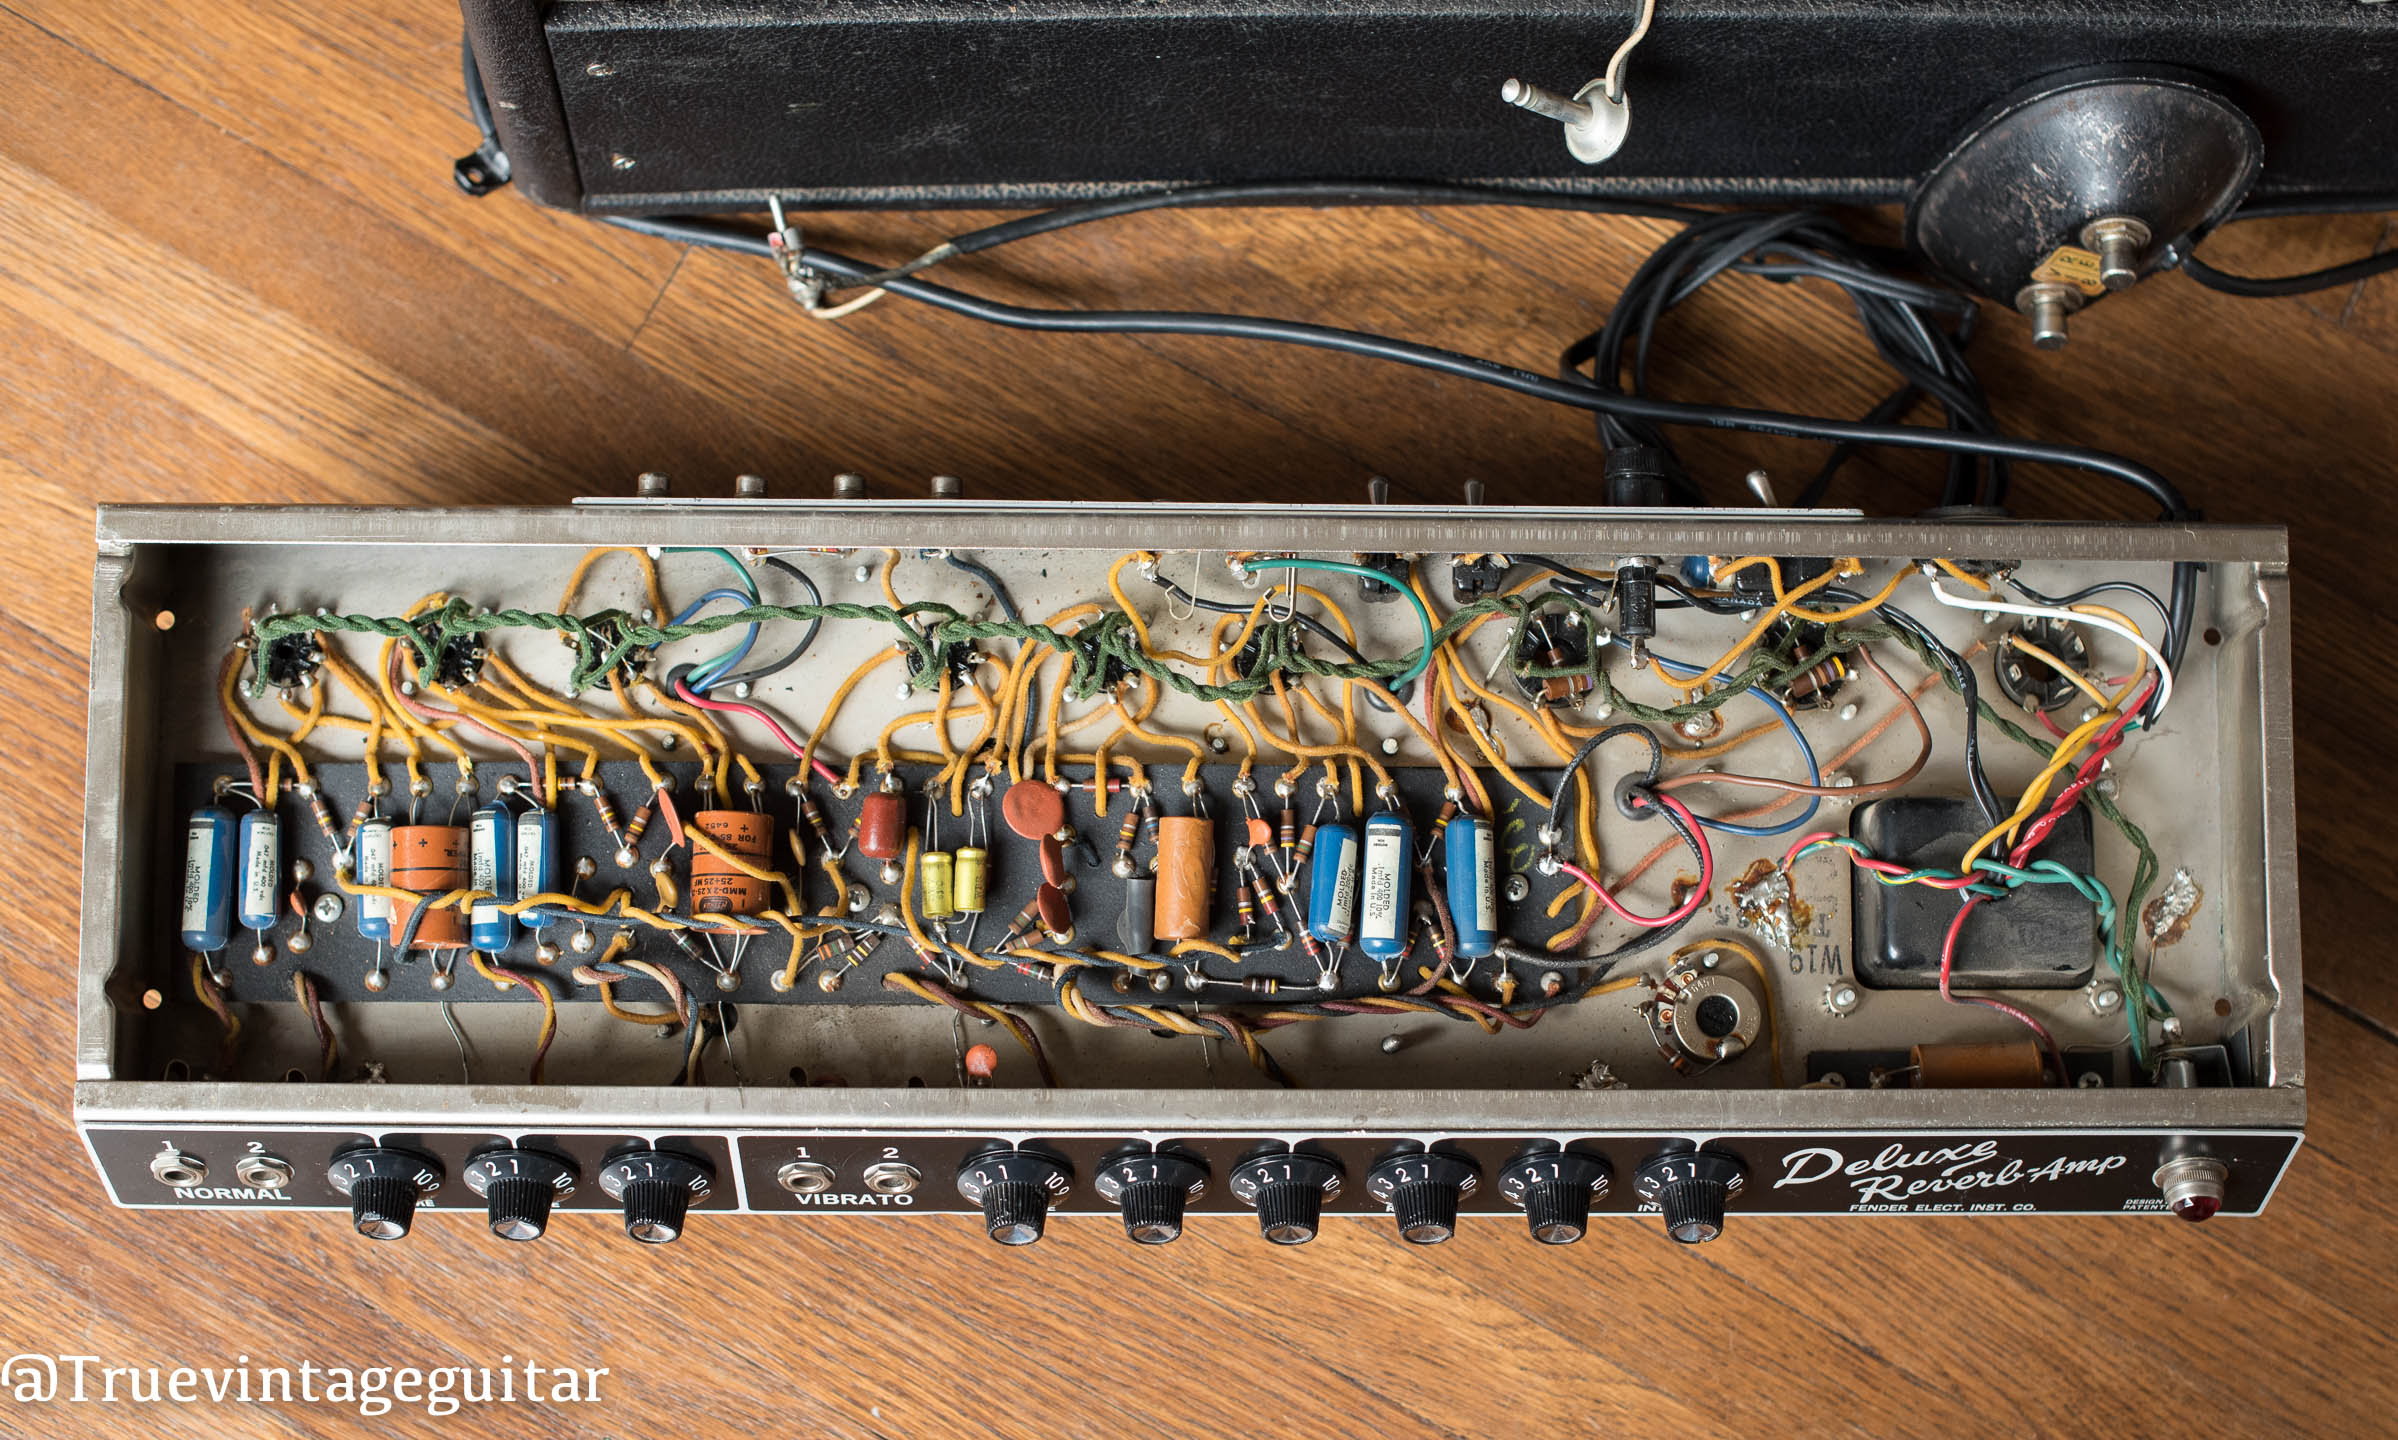 1965 Fender Deluxe Reverb amp, chassis